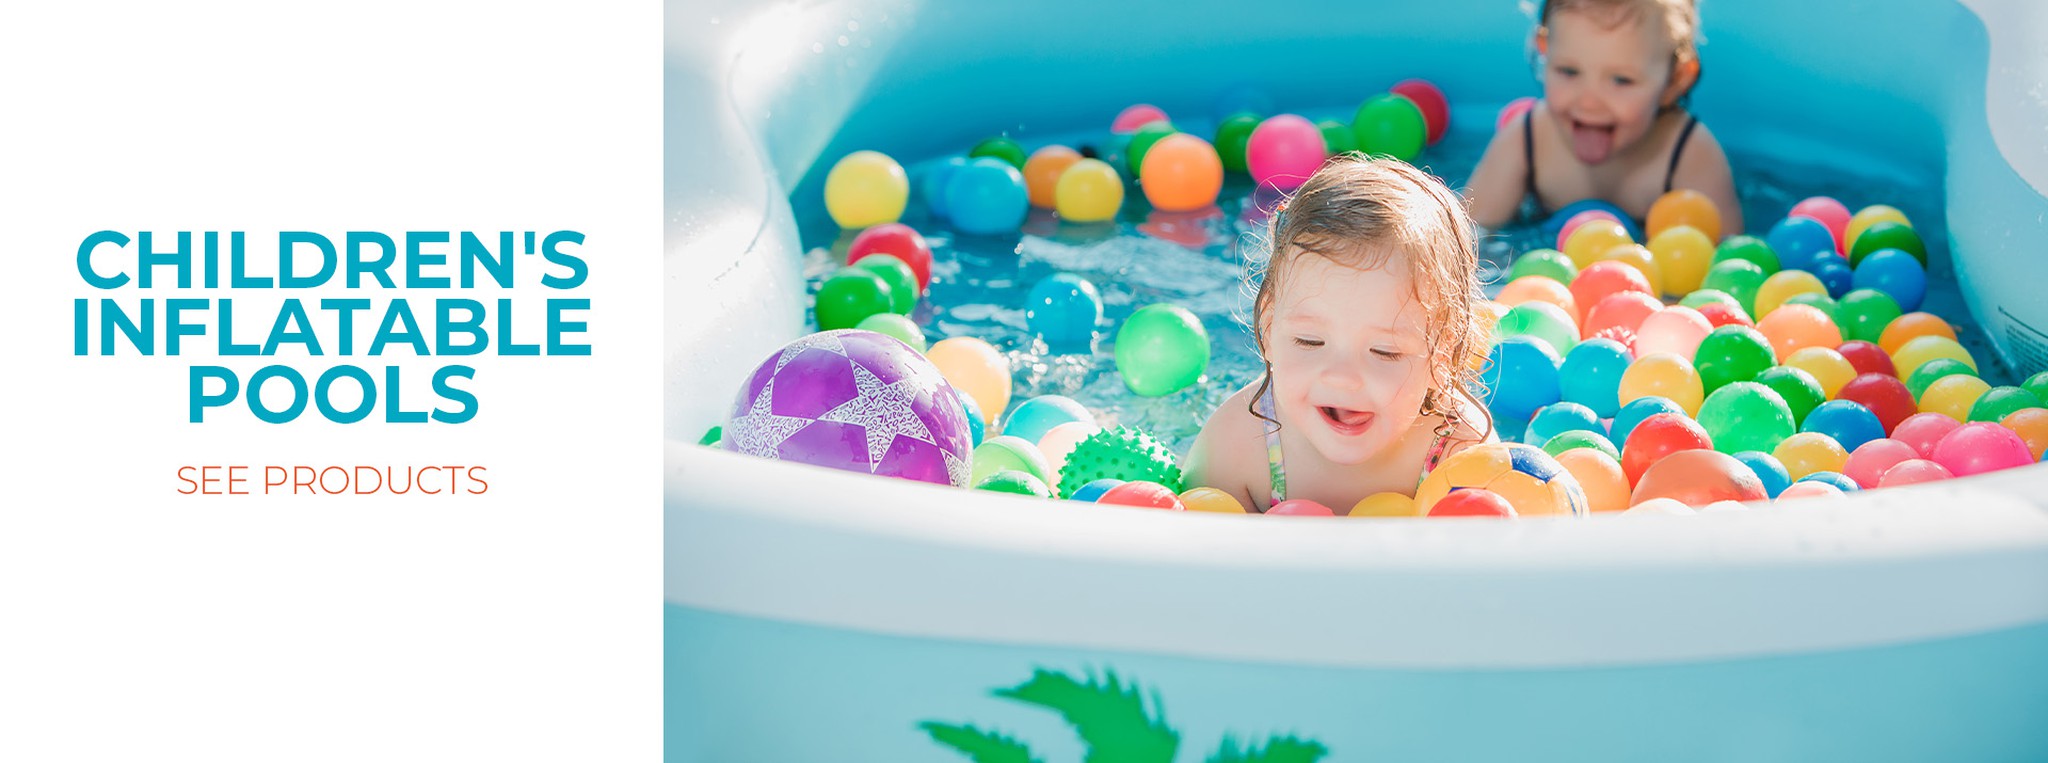 Swimming pools for the happiness of the little ones in the house